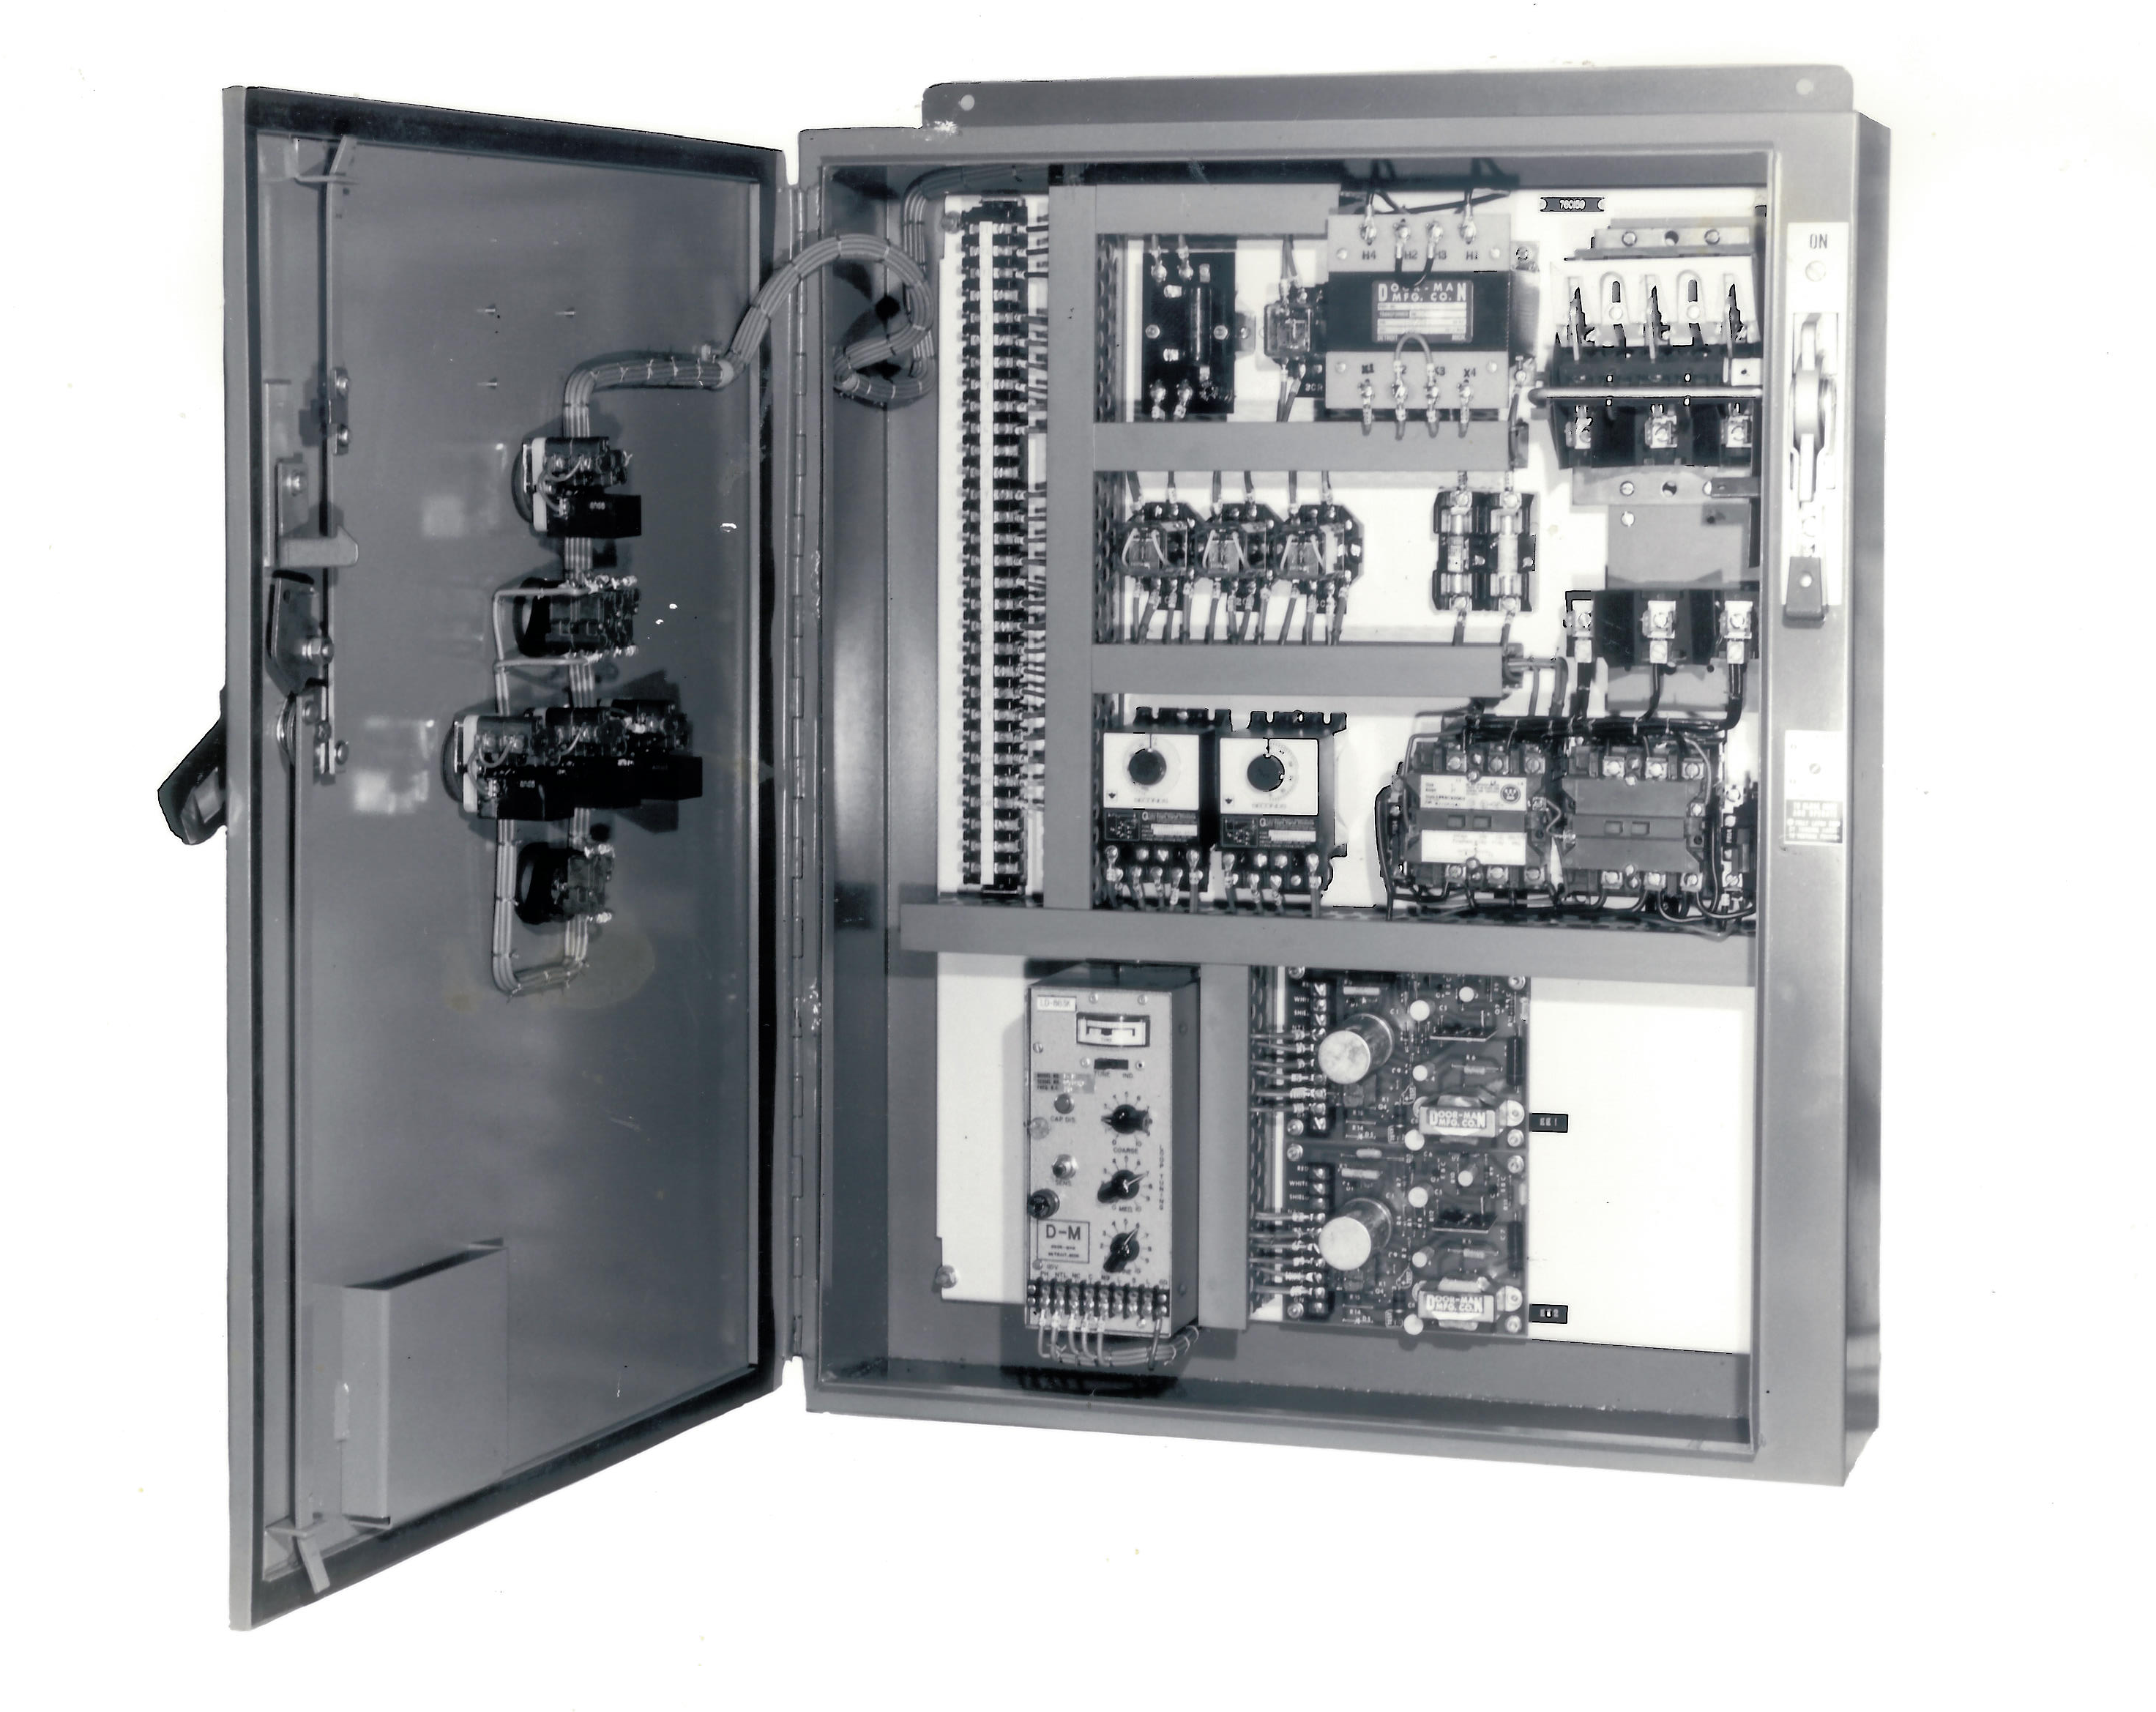 The original automatic control panel by Door-Man Manufacturing